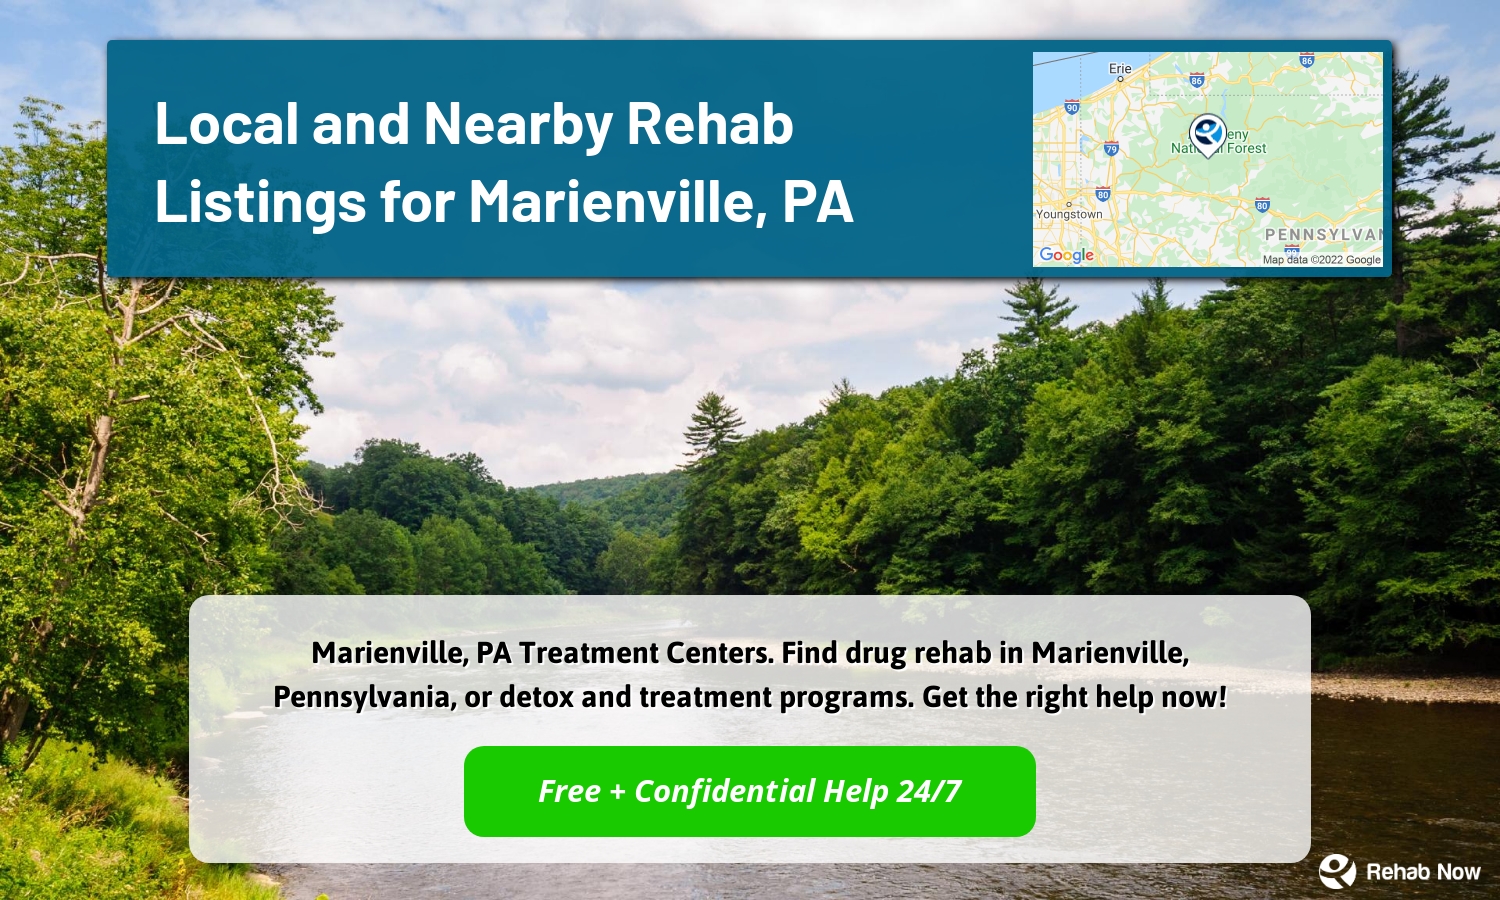 Marienville, PA Treatment Centers. Find drug rehab in Marienville, Pennsylvania, or detox and treatment programs. Get the right help now!